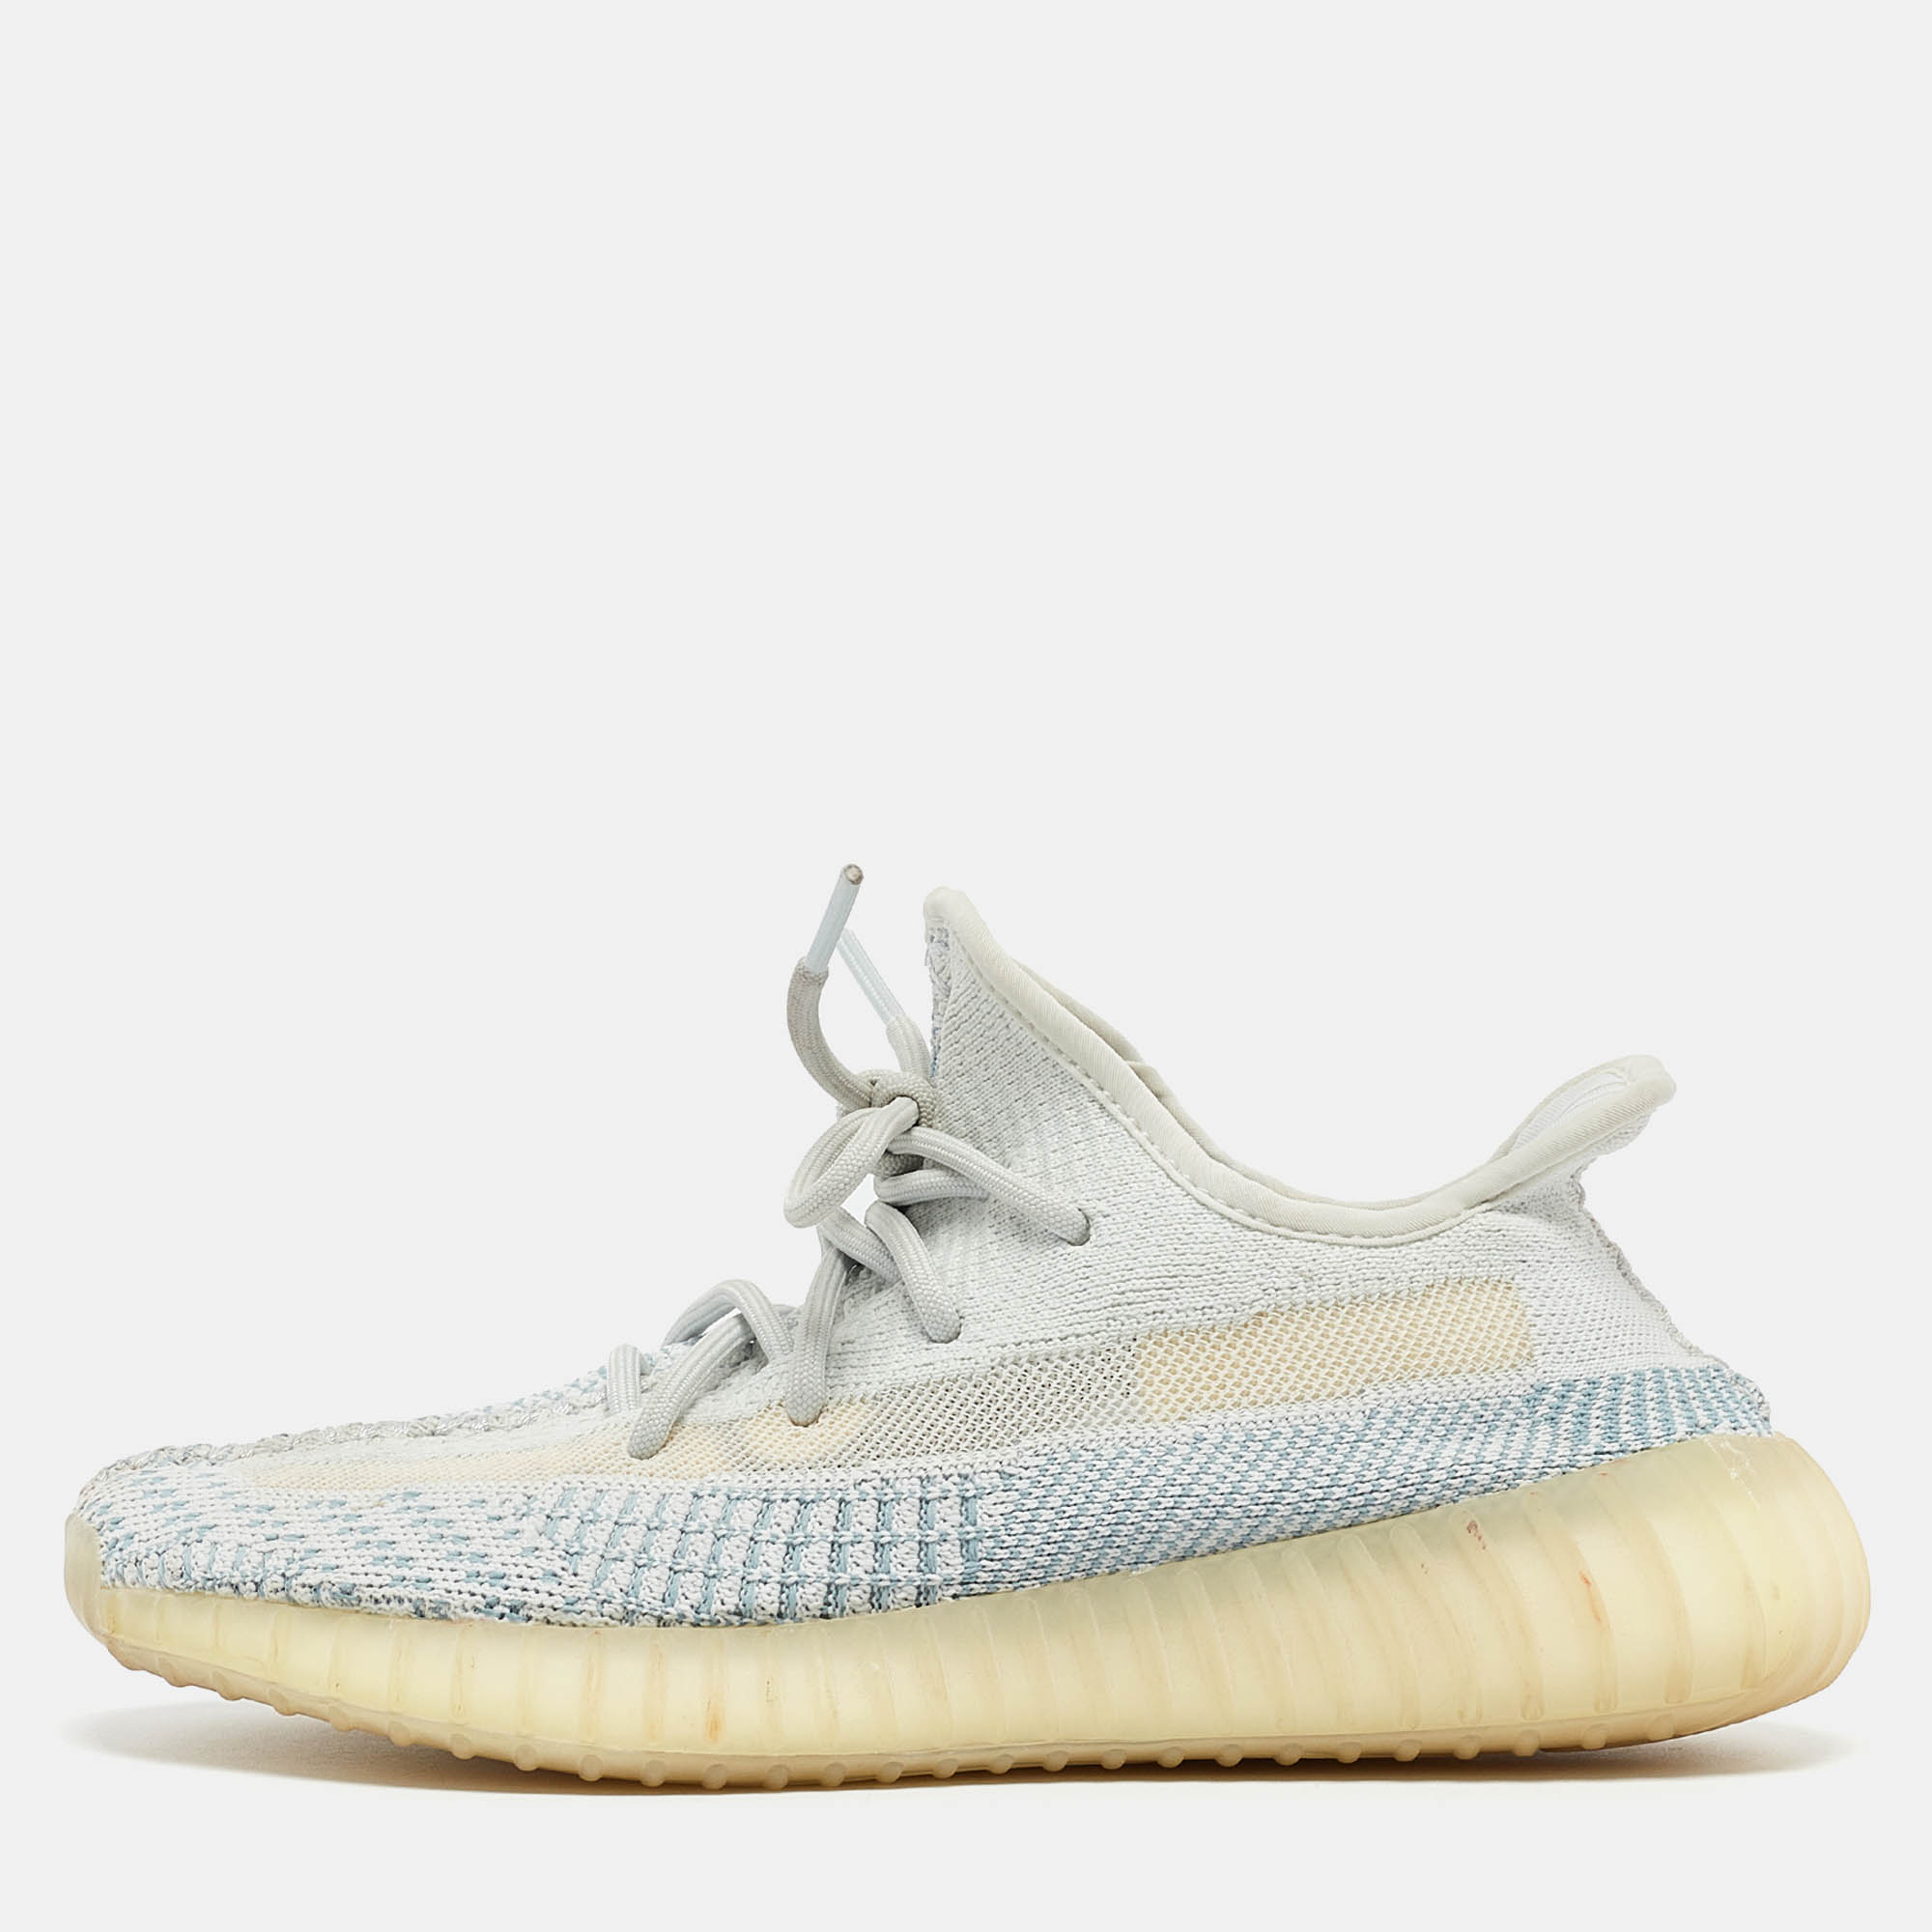 

Yeezy x Adidas White/Green Knit Fabric Boost 350 V2 Cloud White Non Reflective Sneakers Size 38 2/3